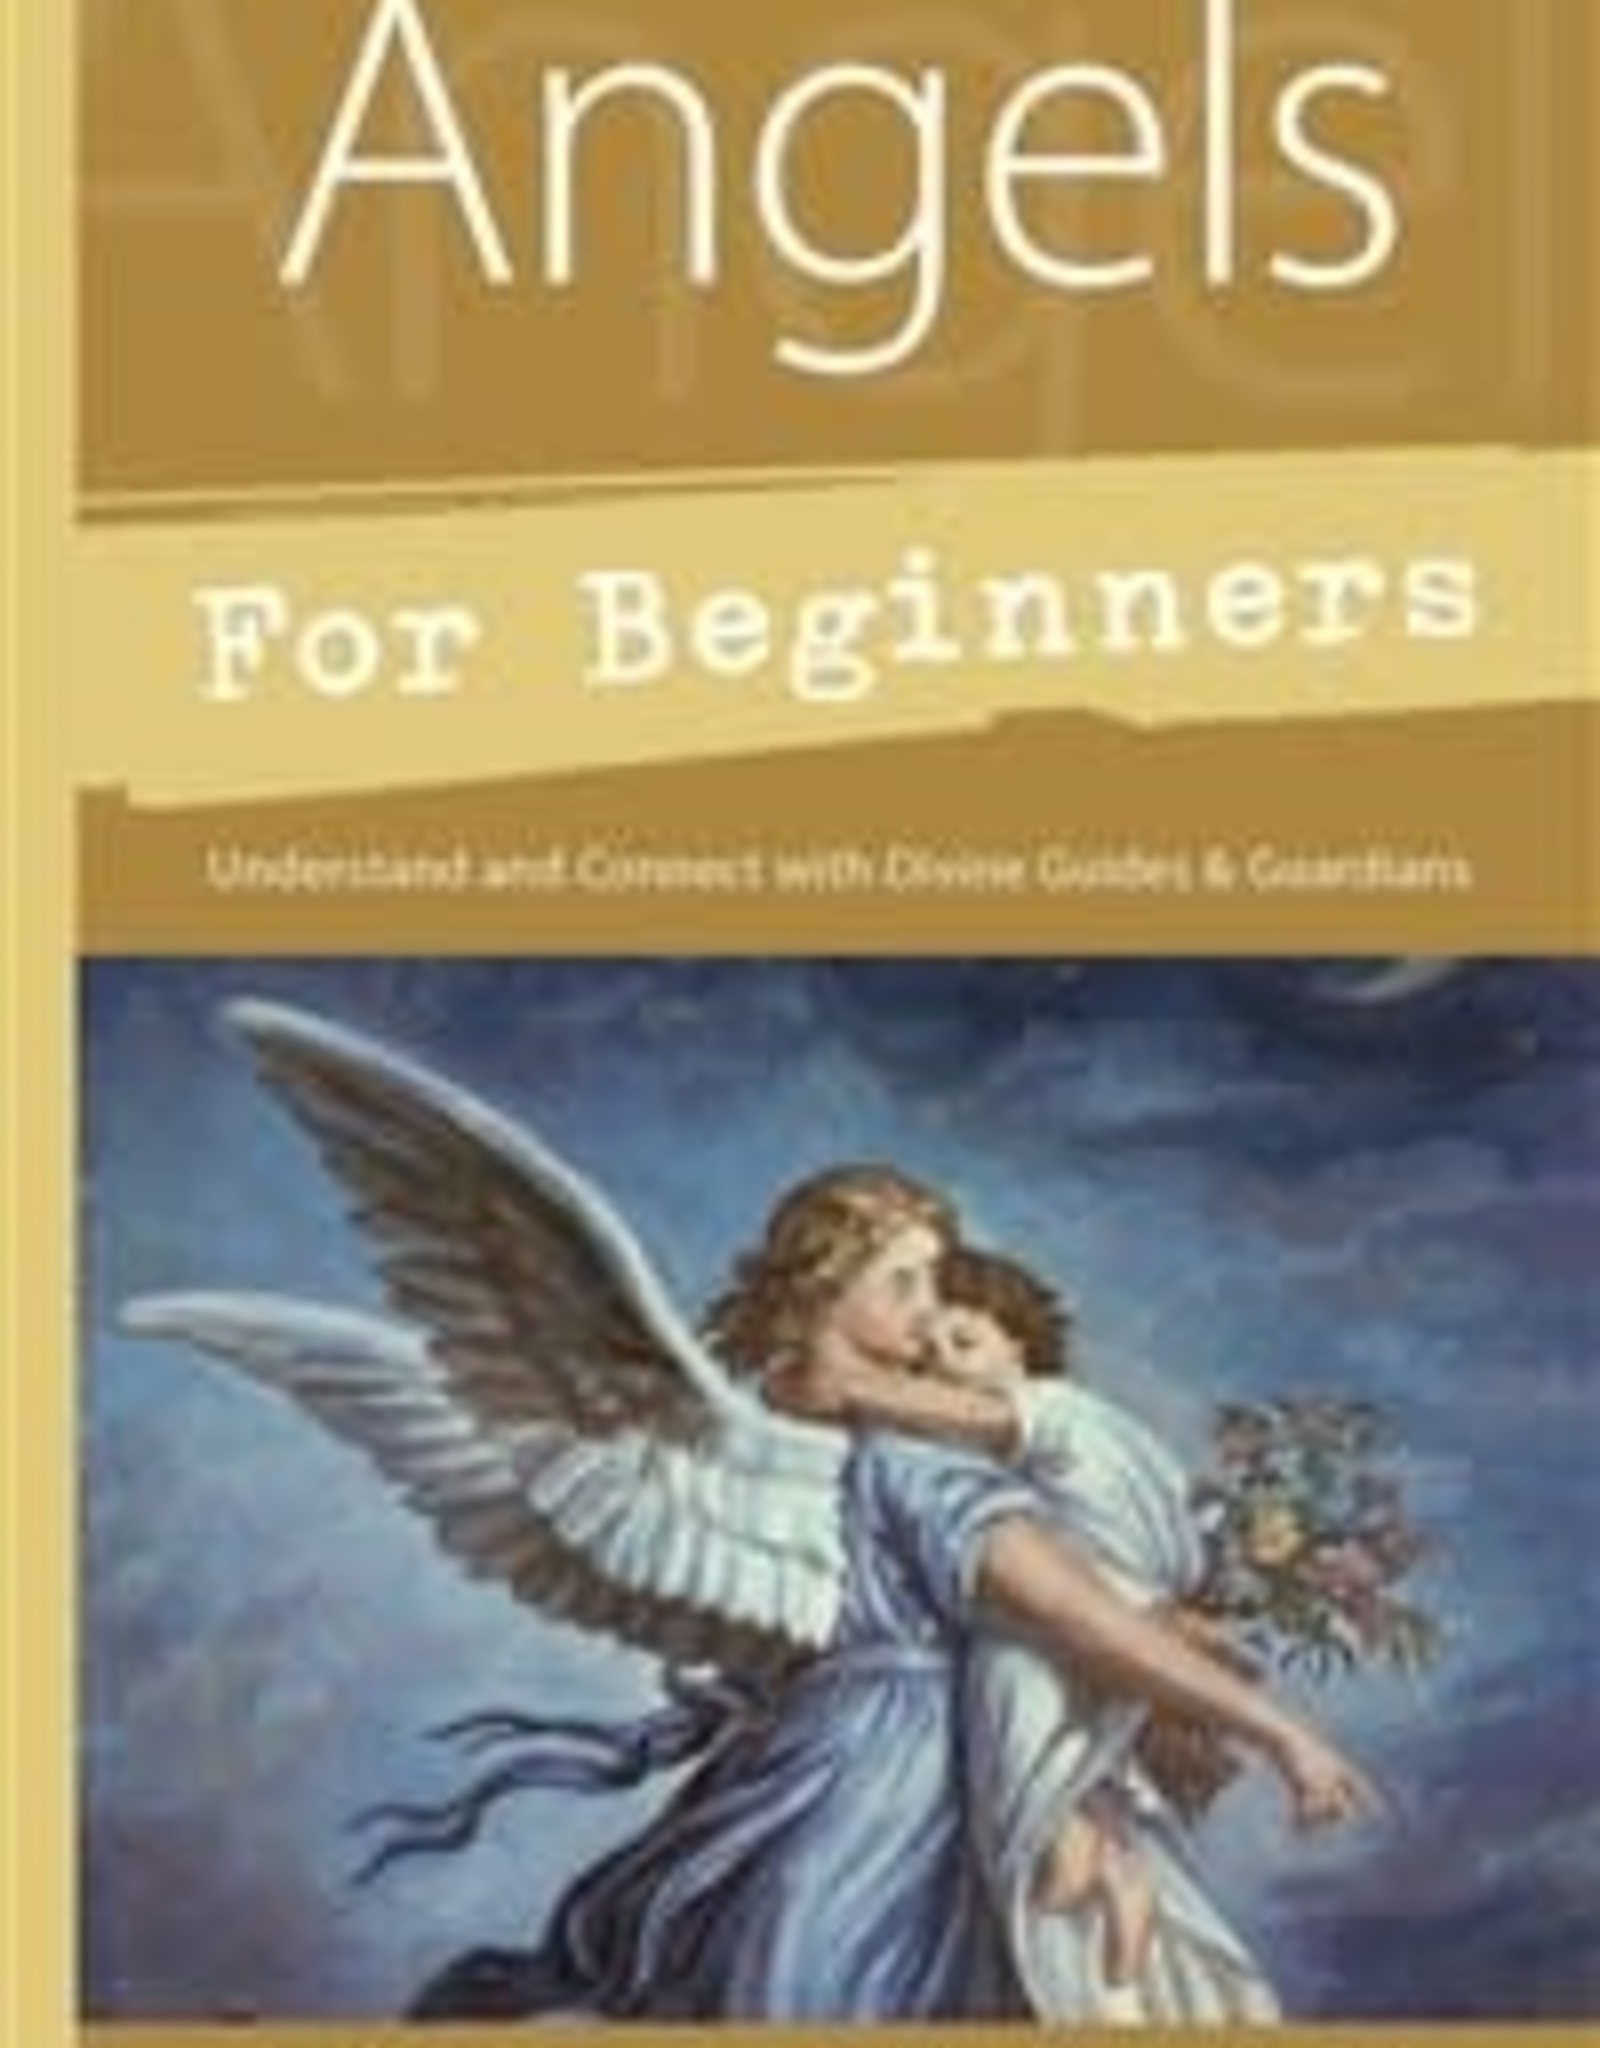 Thomas & Friends Angels for Beginners